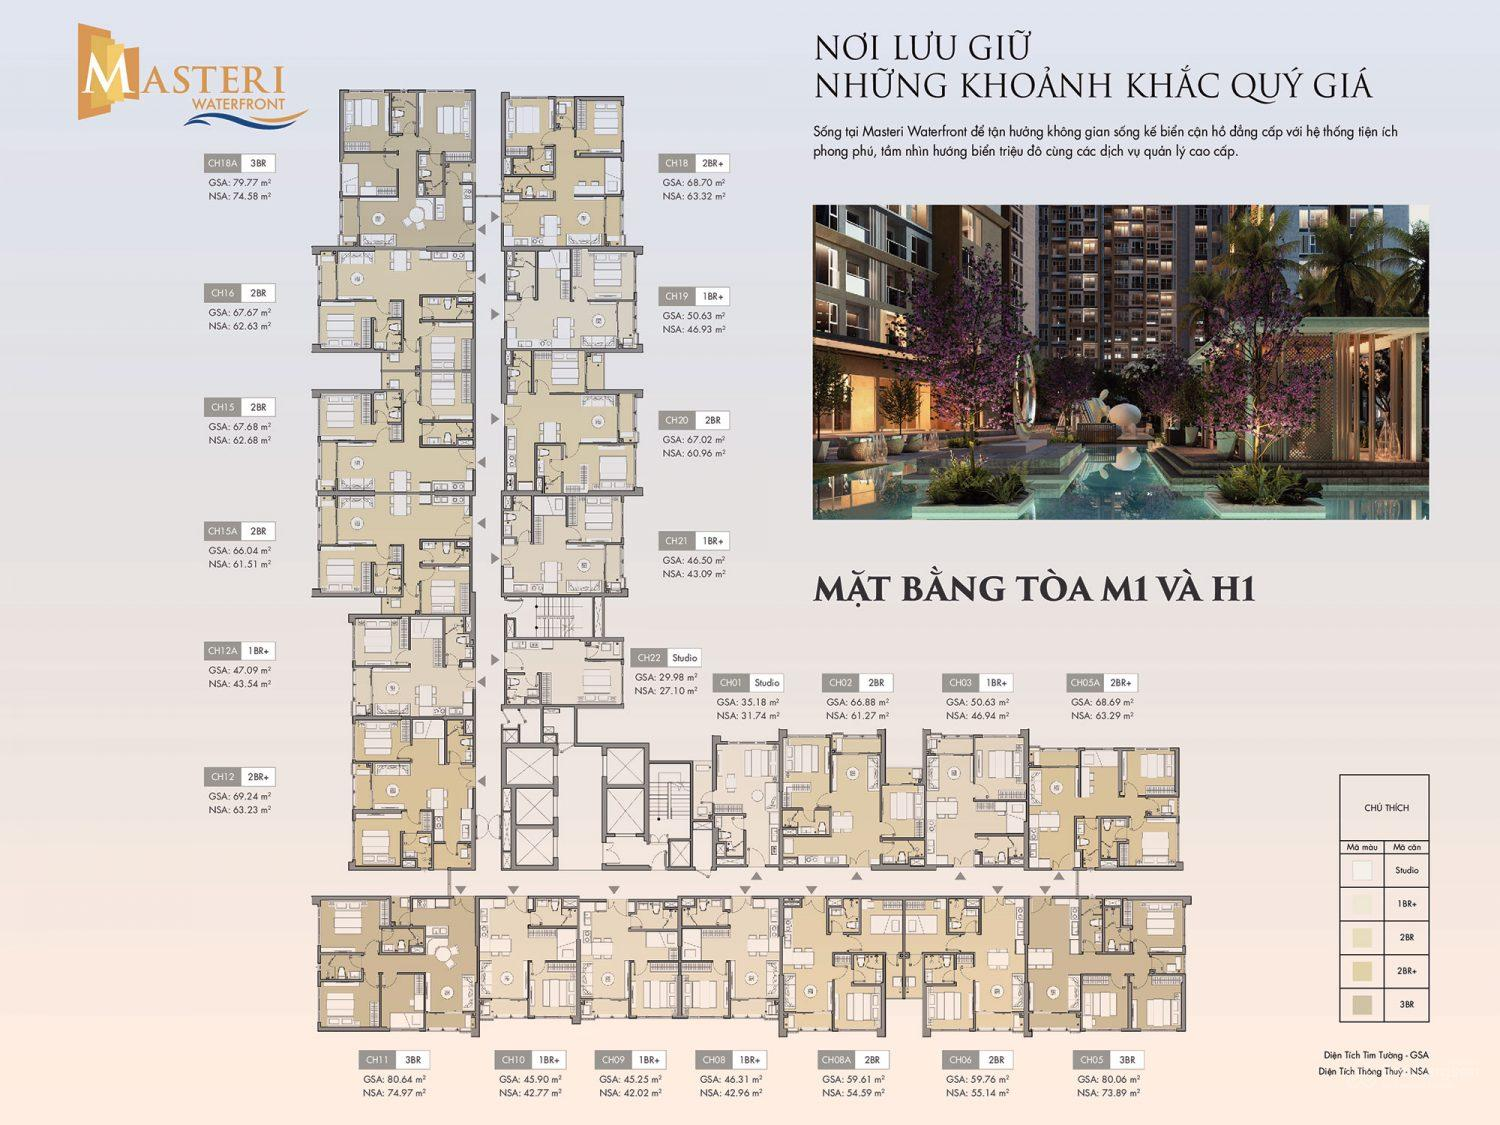 dien-tich-tim-tuong-dien-tich-thong-thuy-can-ho-1-phong-ngu-toa-m1-masteri-waterfront-onehousing-2